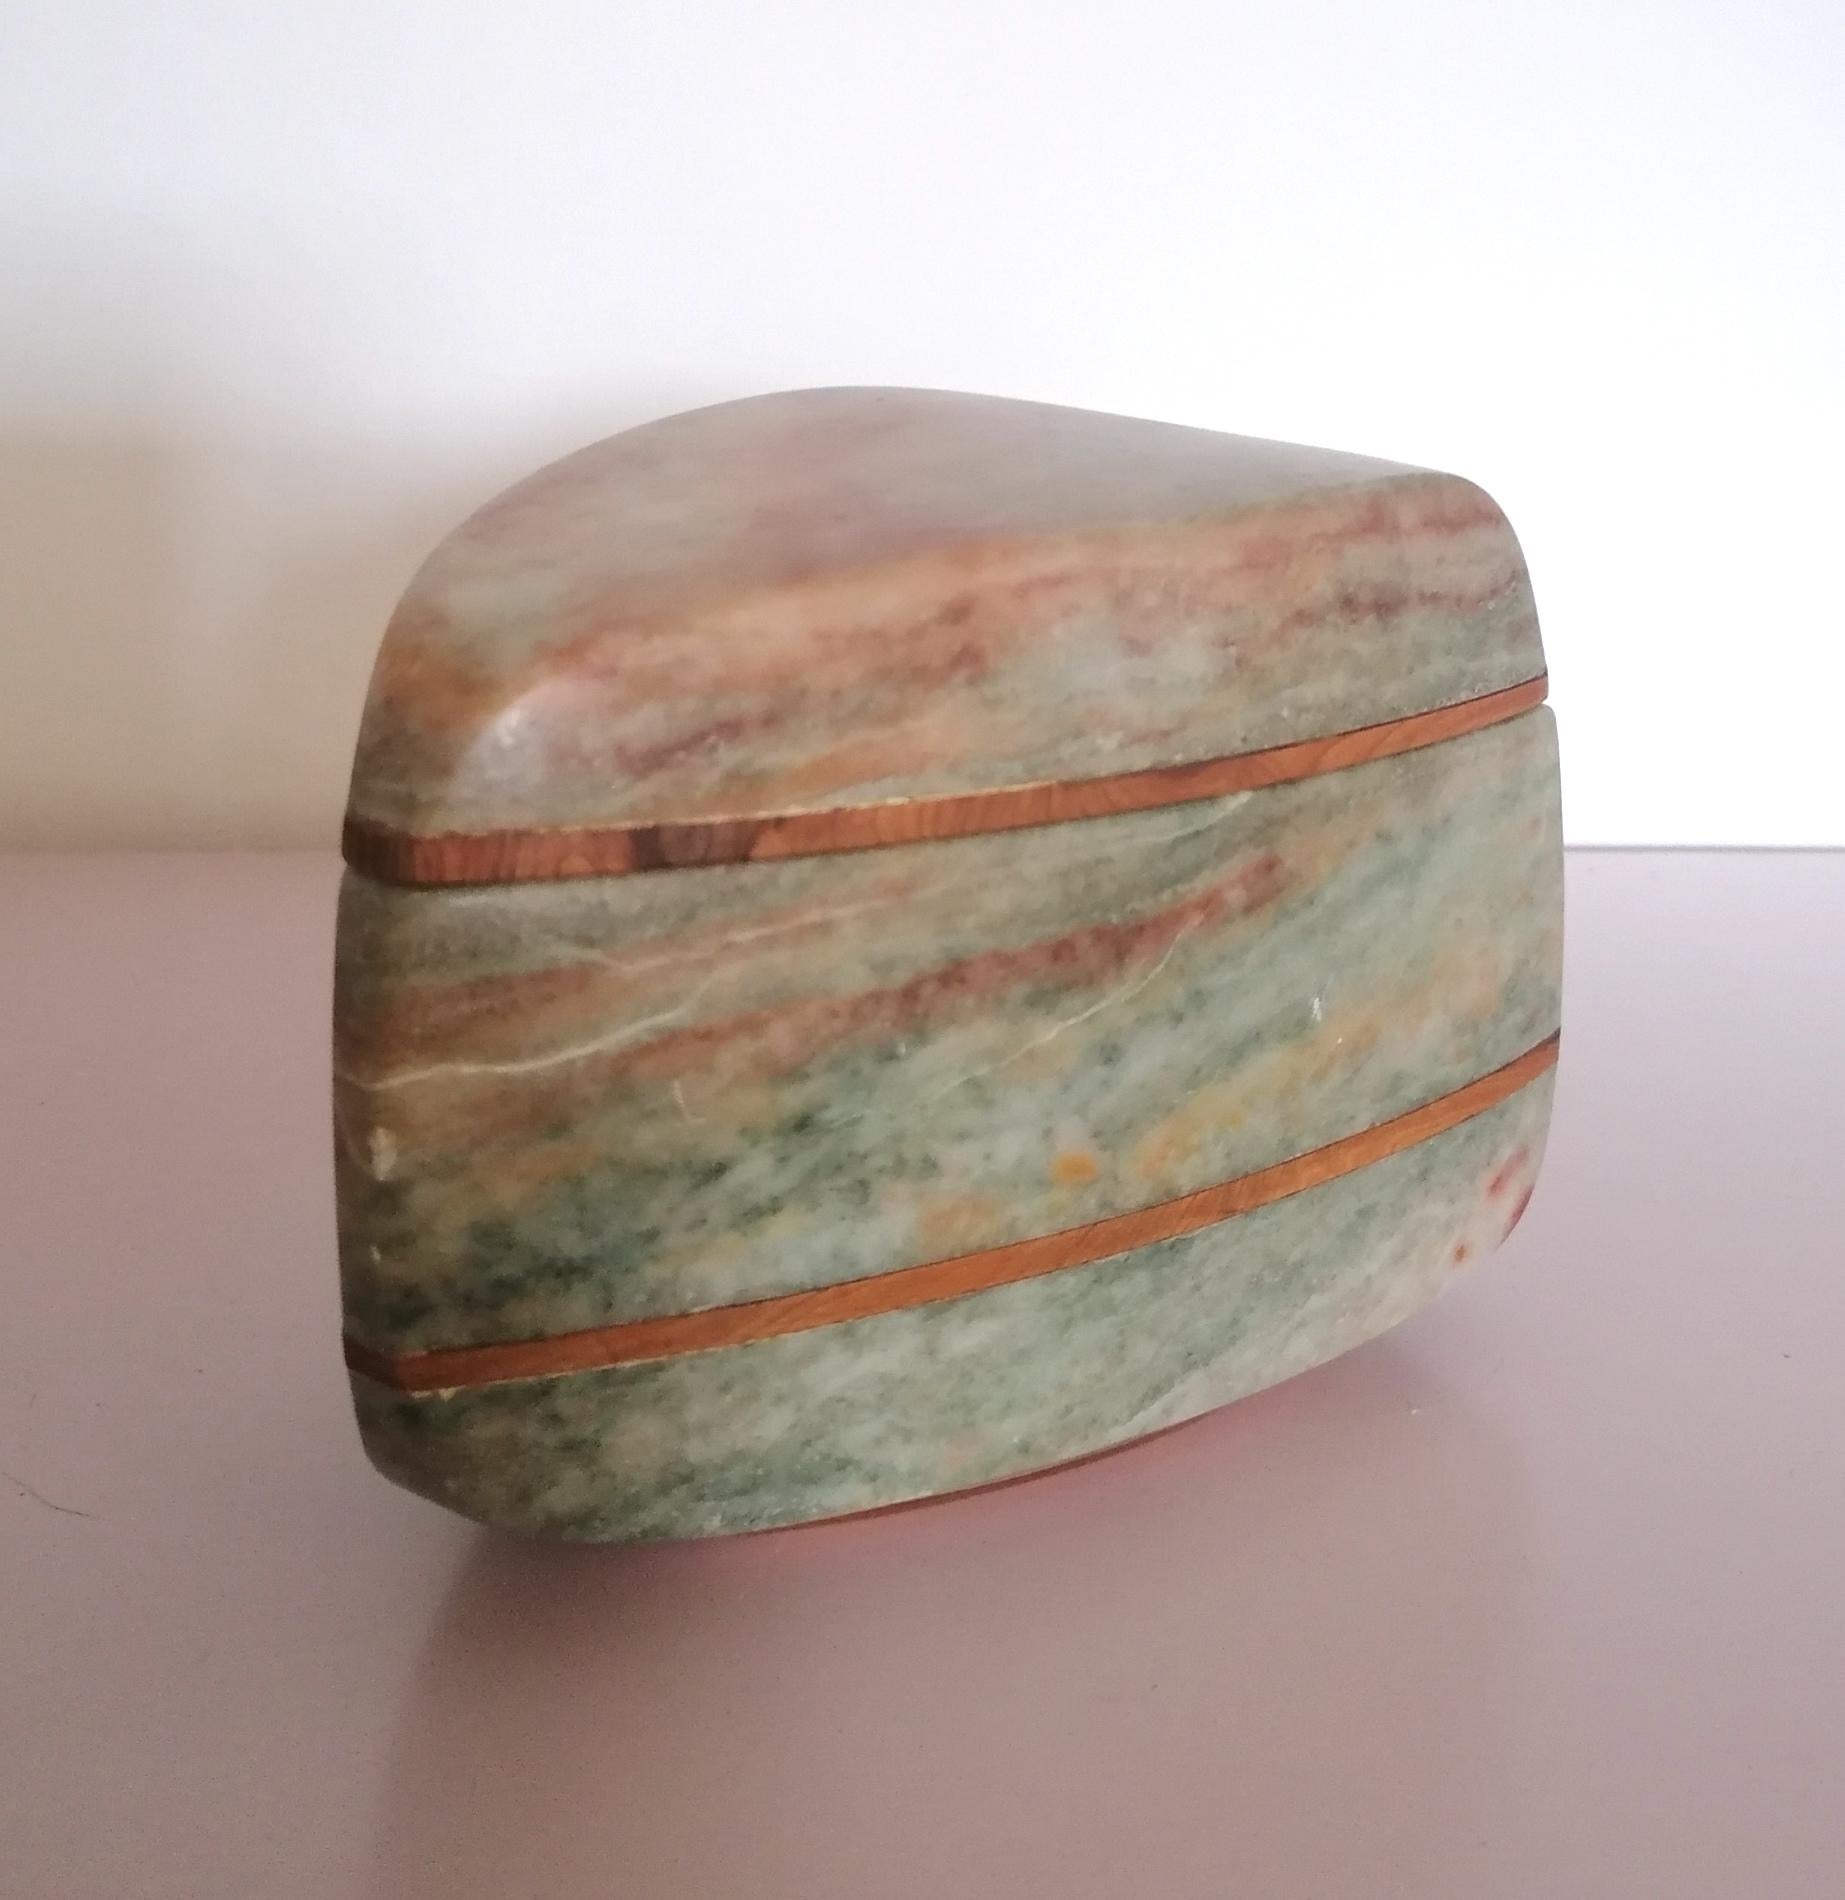 This beautifully tactile sculptural onyx lidded box is a unique artist-made piece...unfortunately I've been unable to identify the maker's mark. We sourced it in Phoenix, Arizona.
Bands of walnut are inlaid in the stone body, and walnut lines the